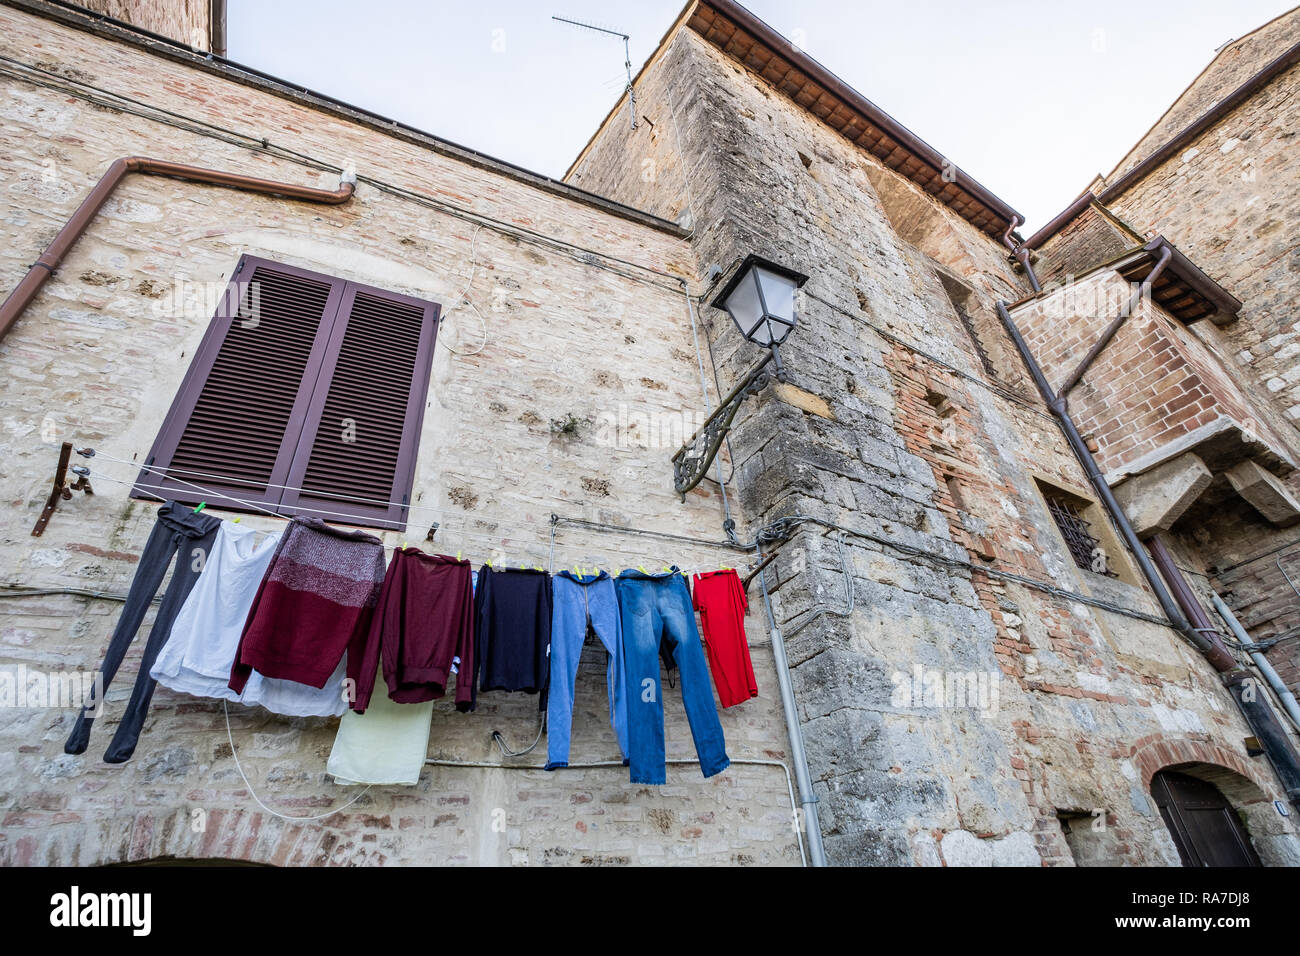 Cloths spread in Piazza della Misericordia in the oldest part of Colle Val d'Elsa, Siena, Tuscany Stock Photo